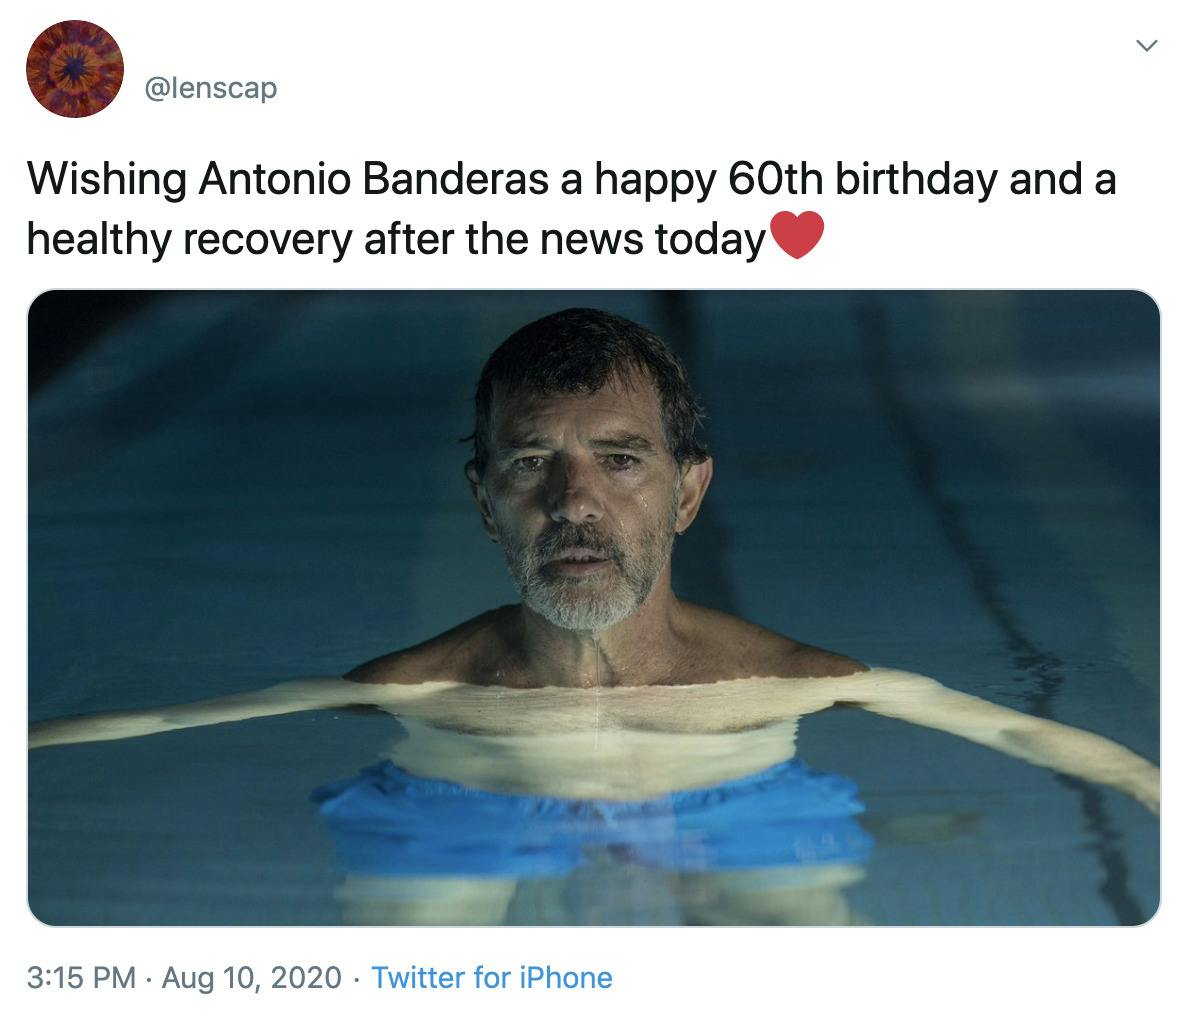 "Wishing Antonio Banderas a happy 60th birthday and a healthy recovery after the news todayRed heart" image of Banderas in a pool